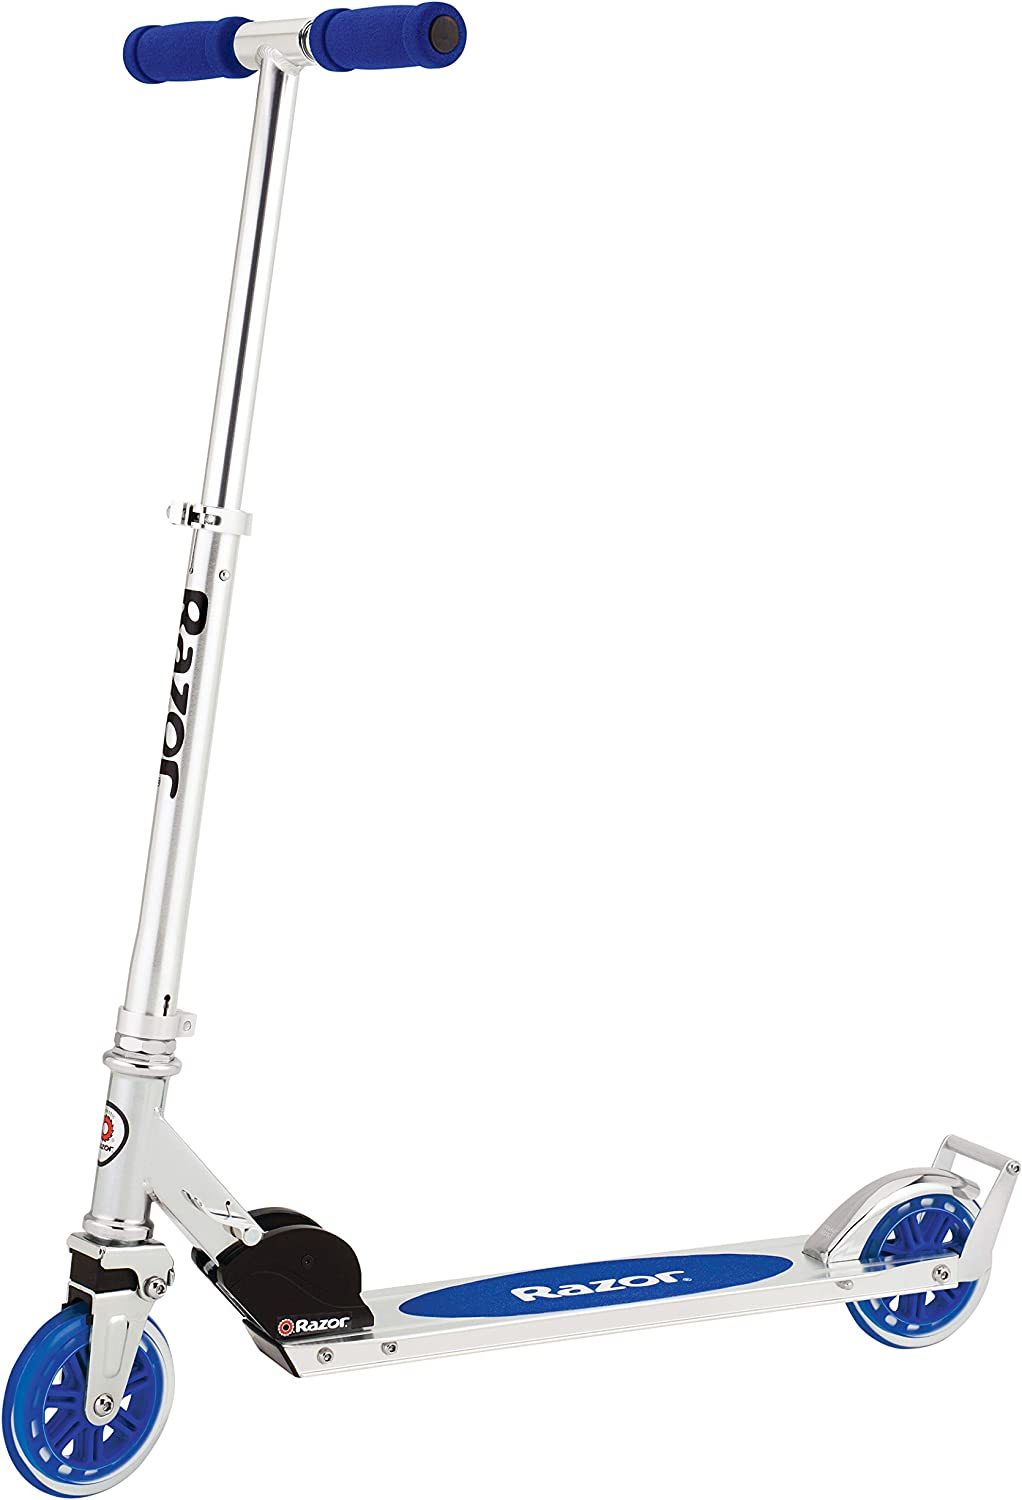 Primary image for Razor A3 Kick Scooter for Kids - Larger Wheels, Front Suspension, Wheelie Bar,